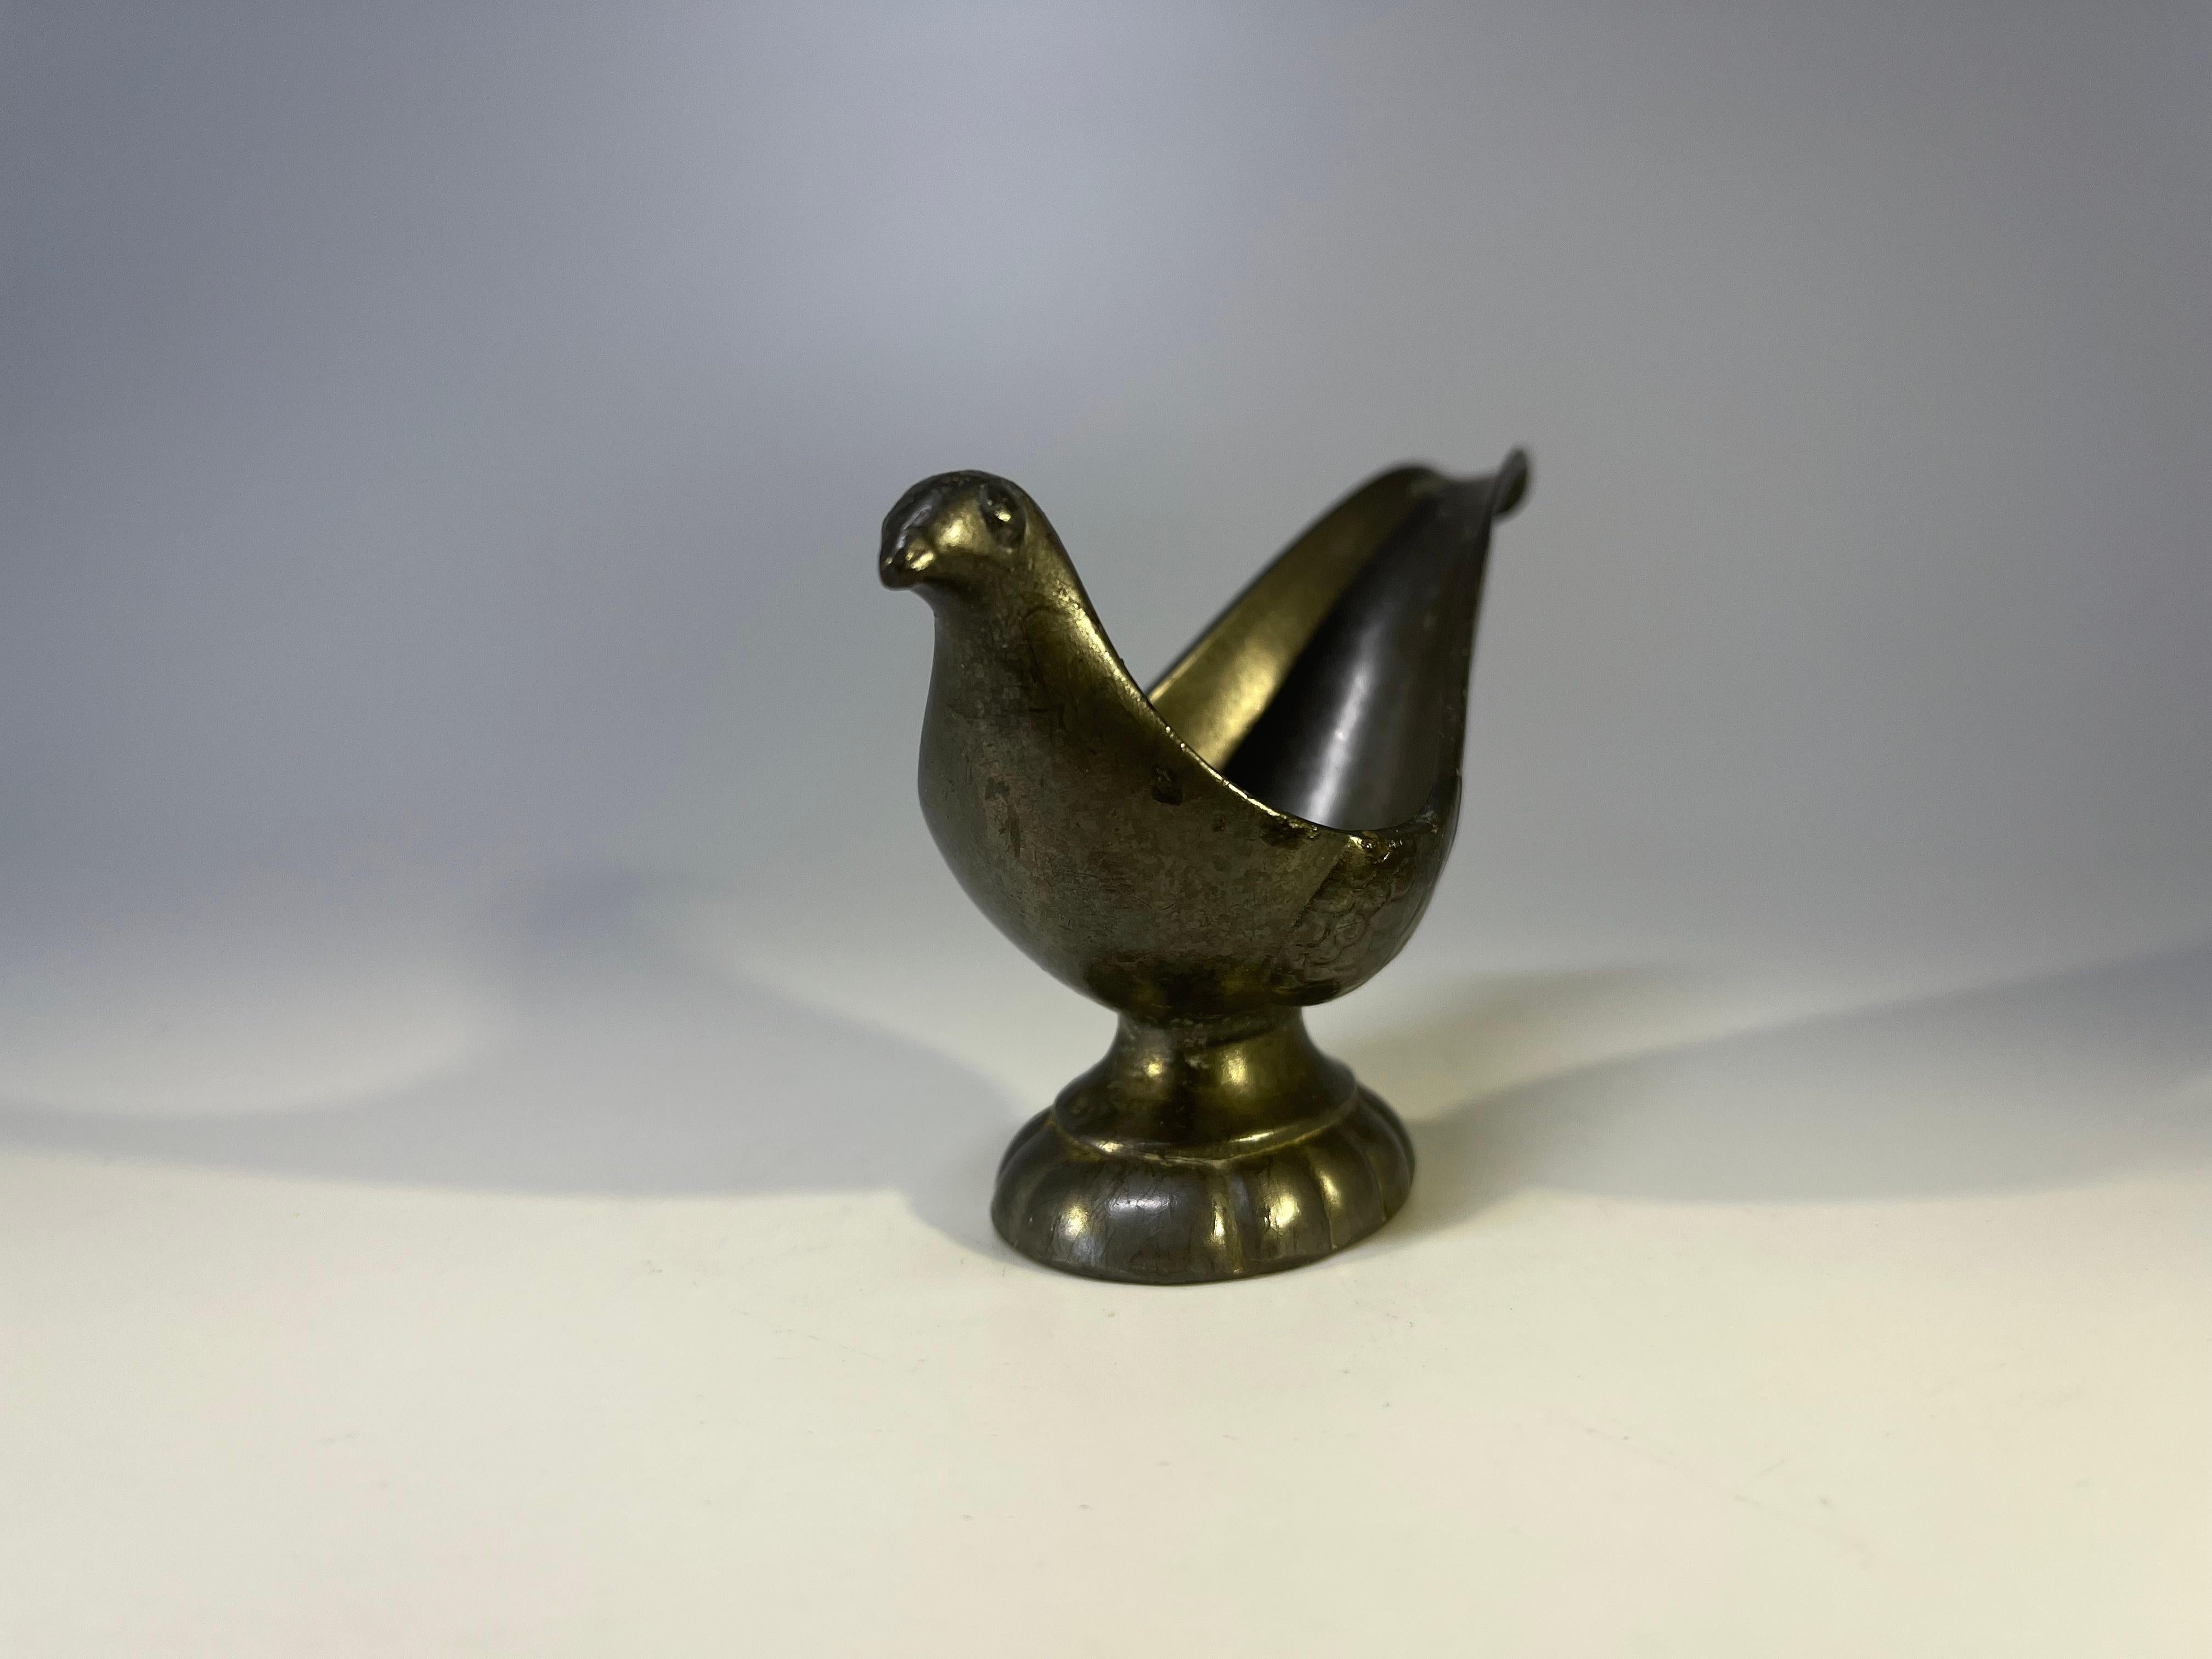 Just Andersen of Denmark, Pewter stylised bird pipe holder.
Circa 1930's.
Stamped on base.
Measures: height 2.5 inch, width 4.25 inch, depth 1.5 inch
Good condition.
Wear consistent with age and use.